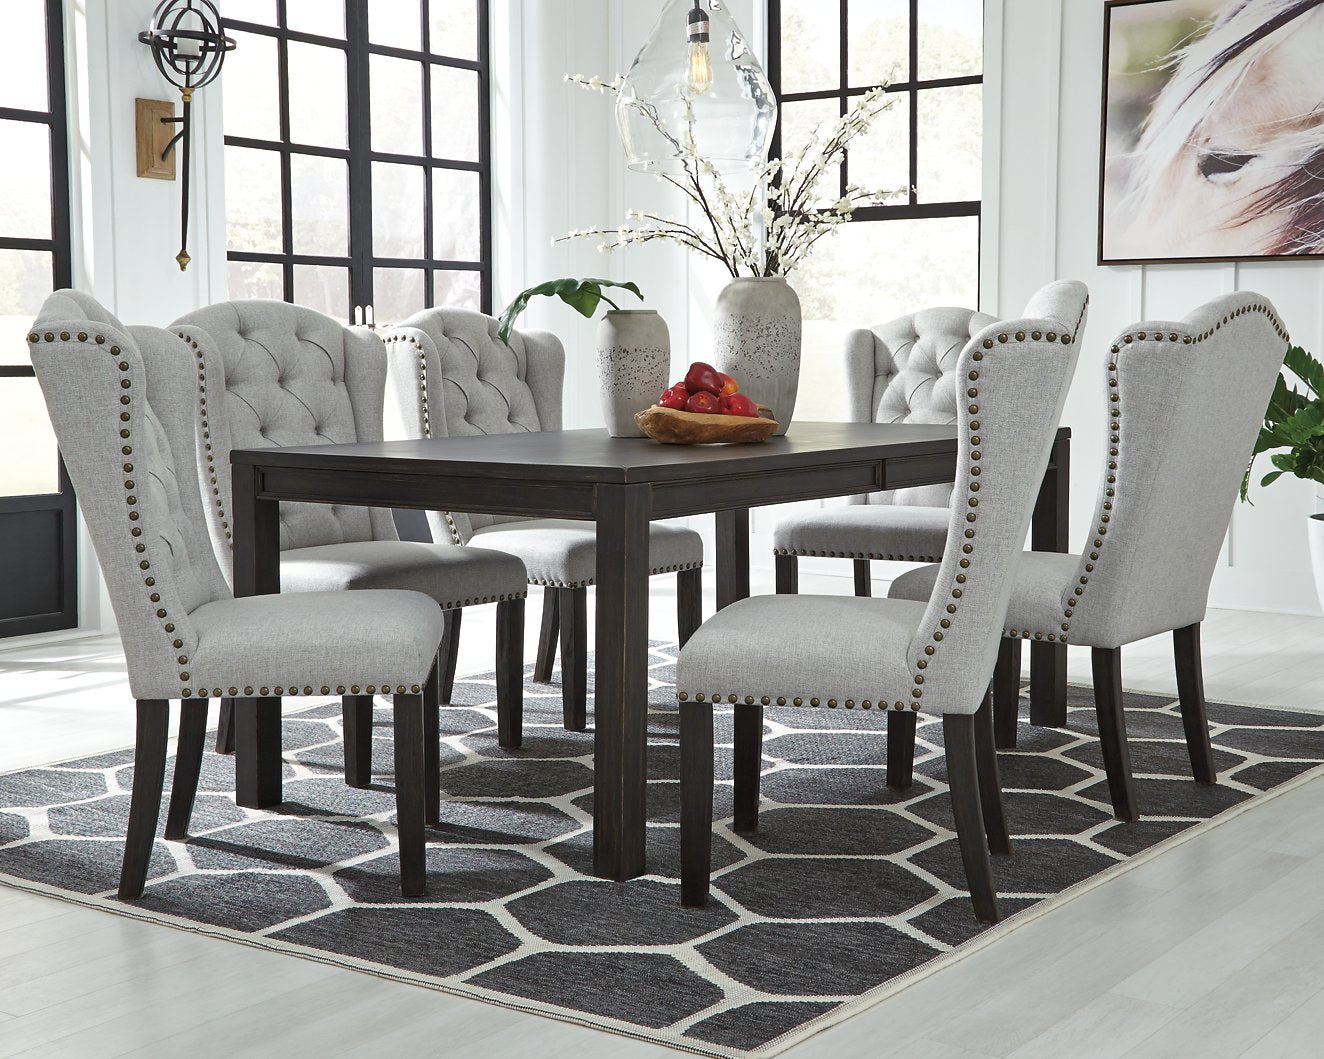 Jeanette Dining Table - Half Price Furniture